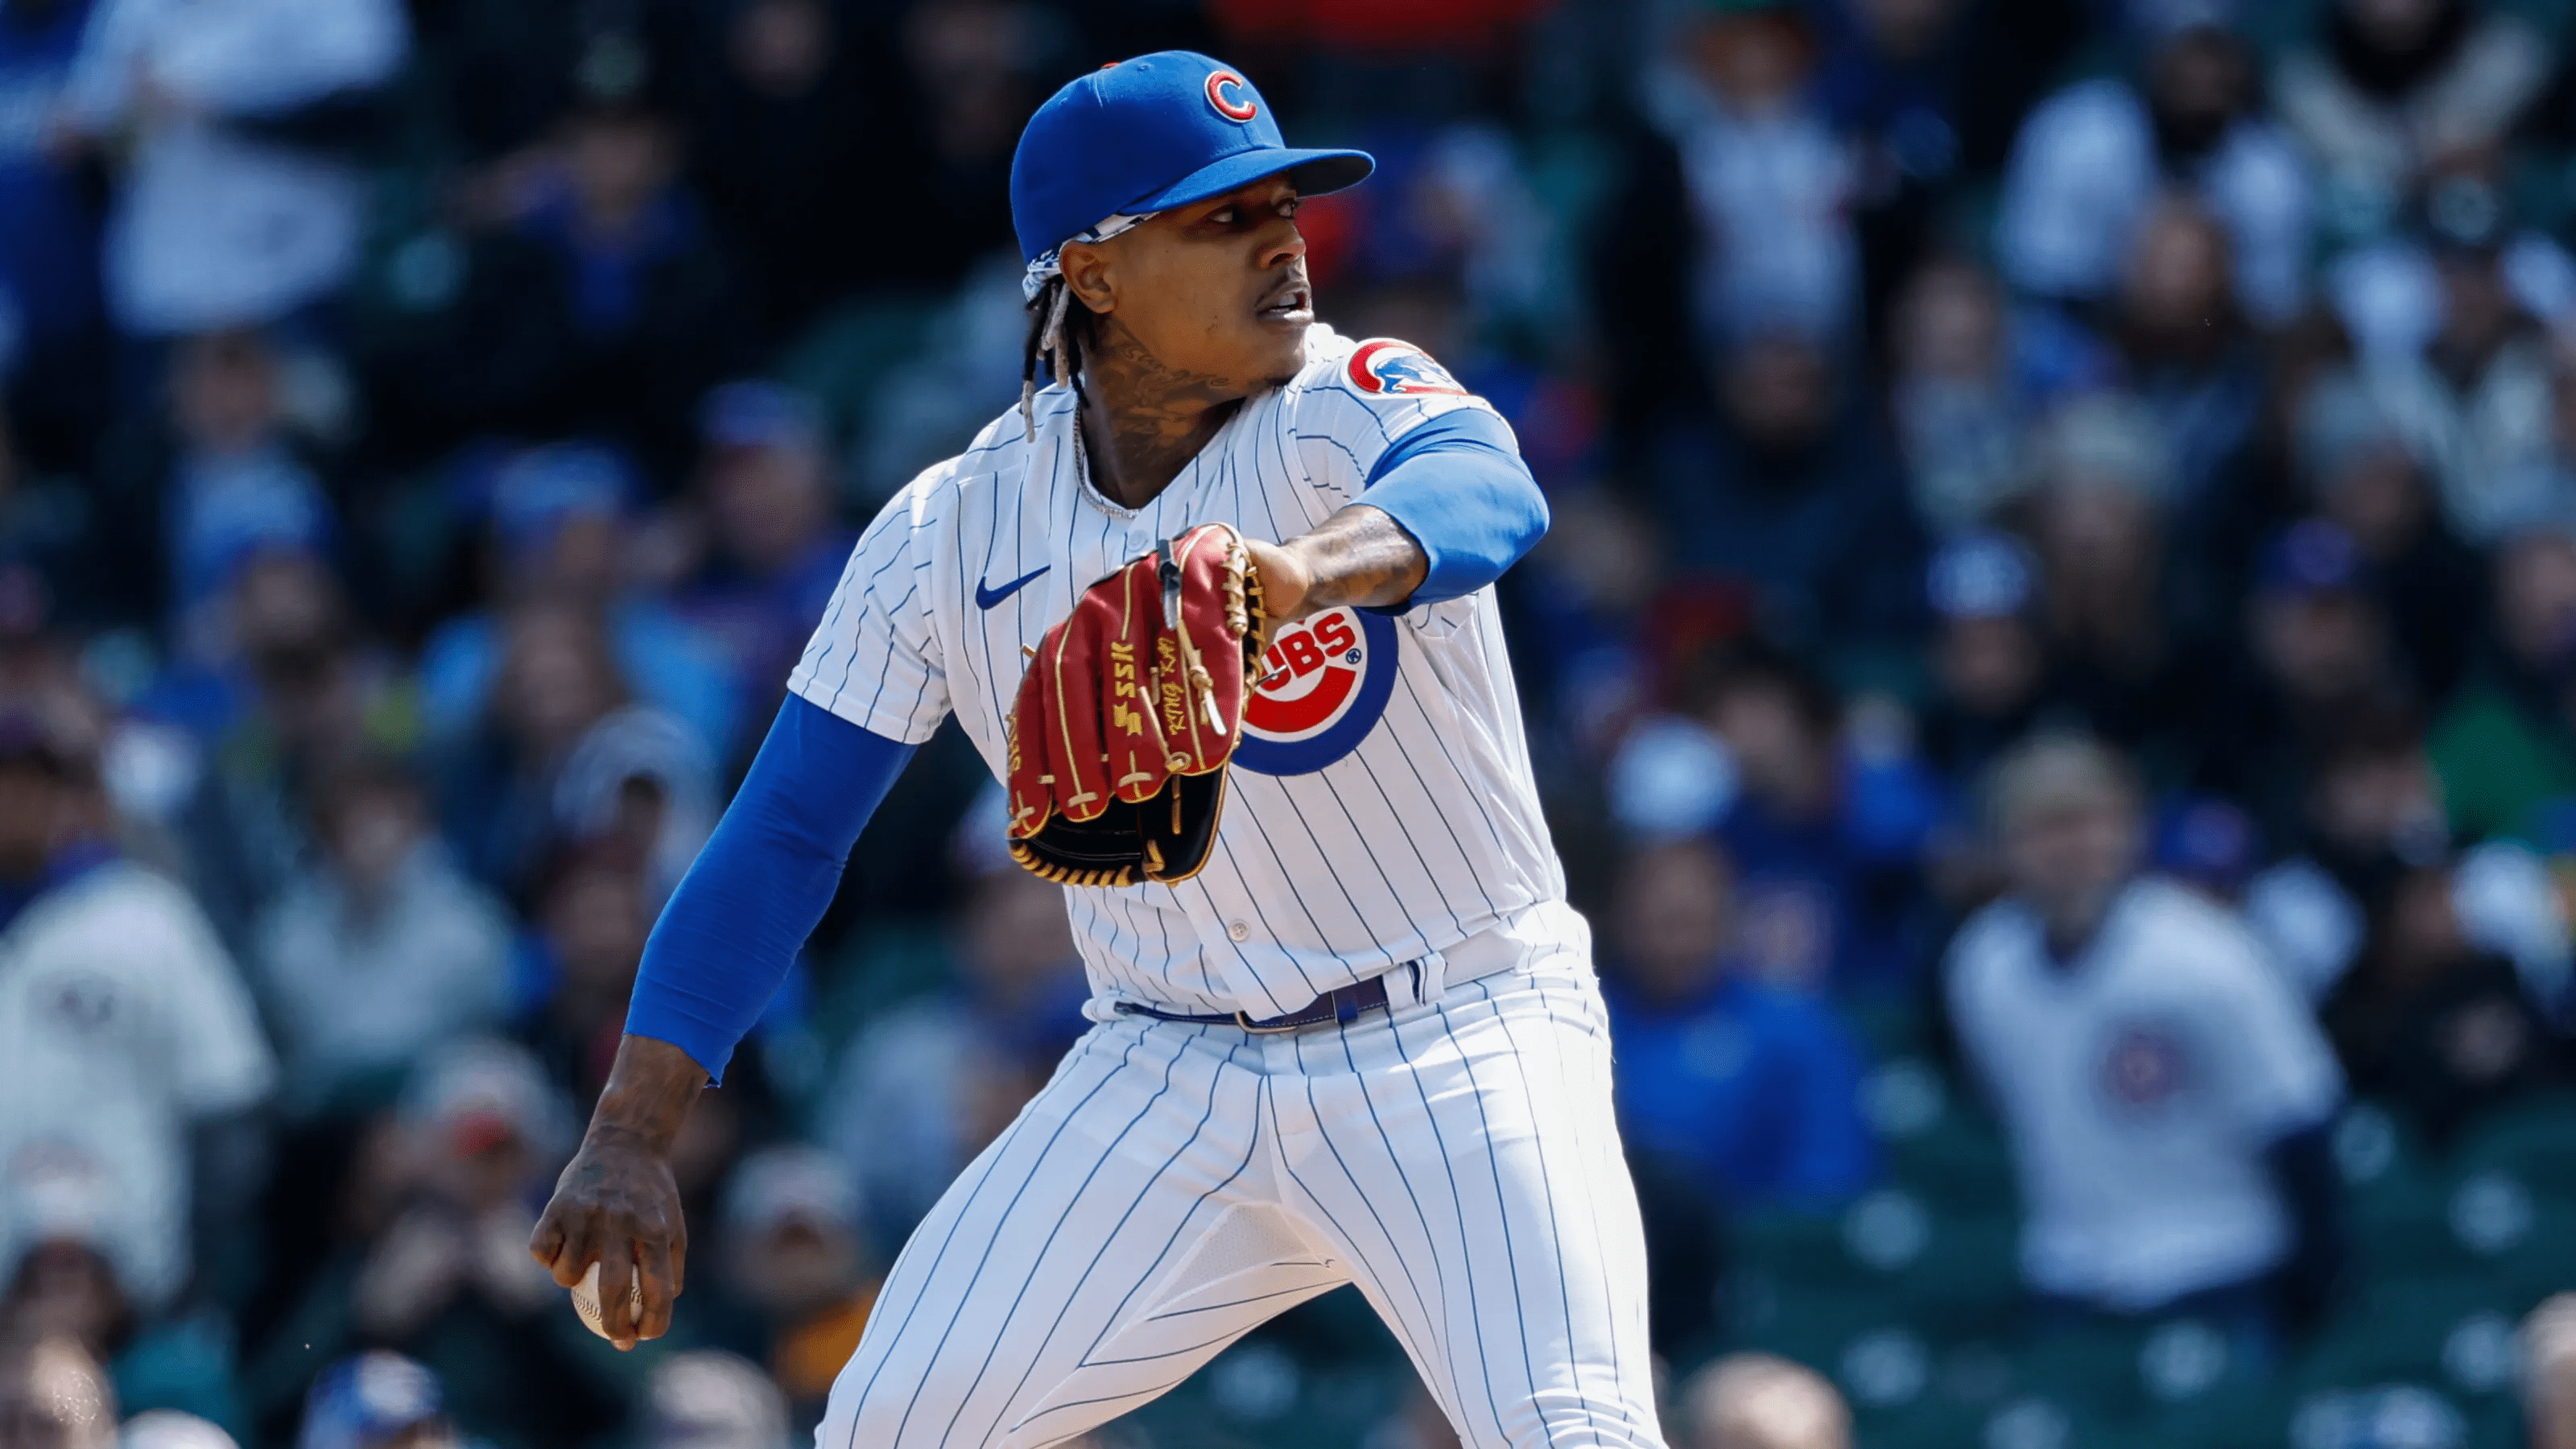 Cubs pitcher Marcus Stroman makes history with MLB's first pitch